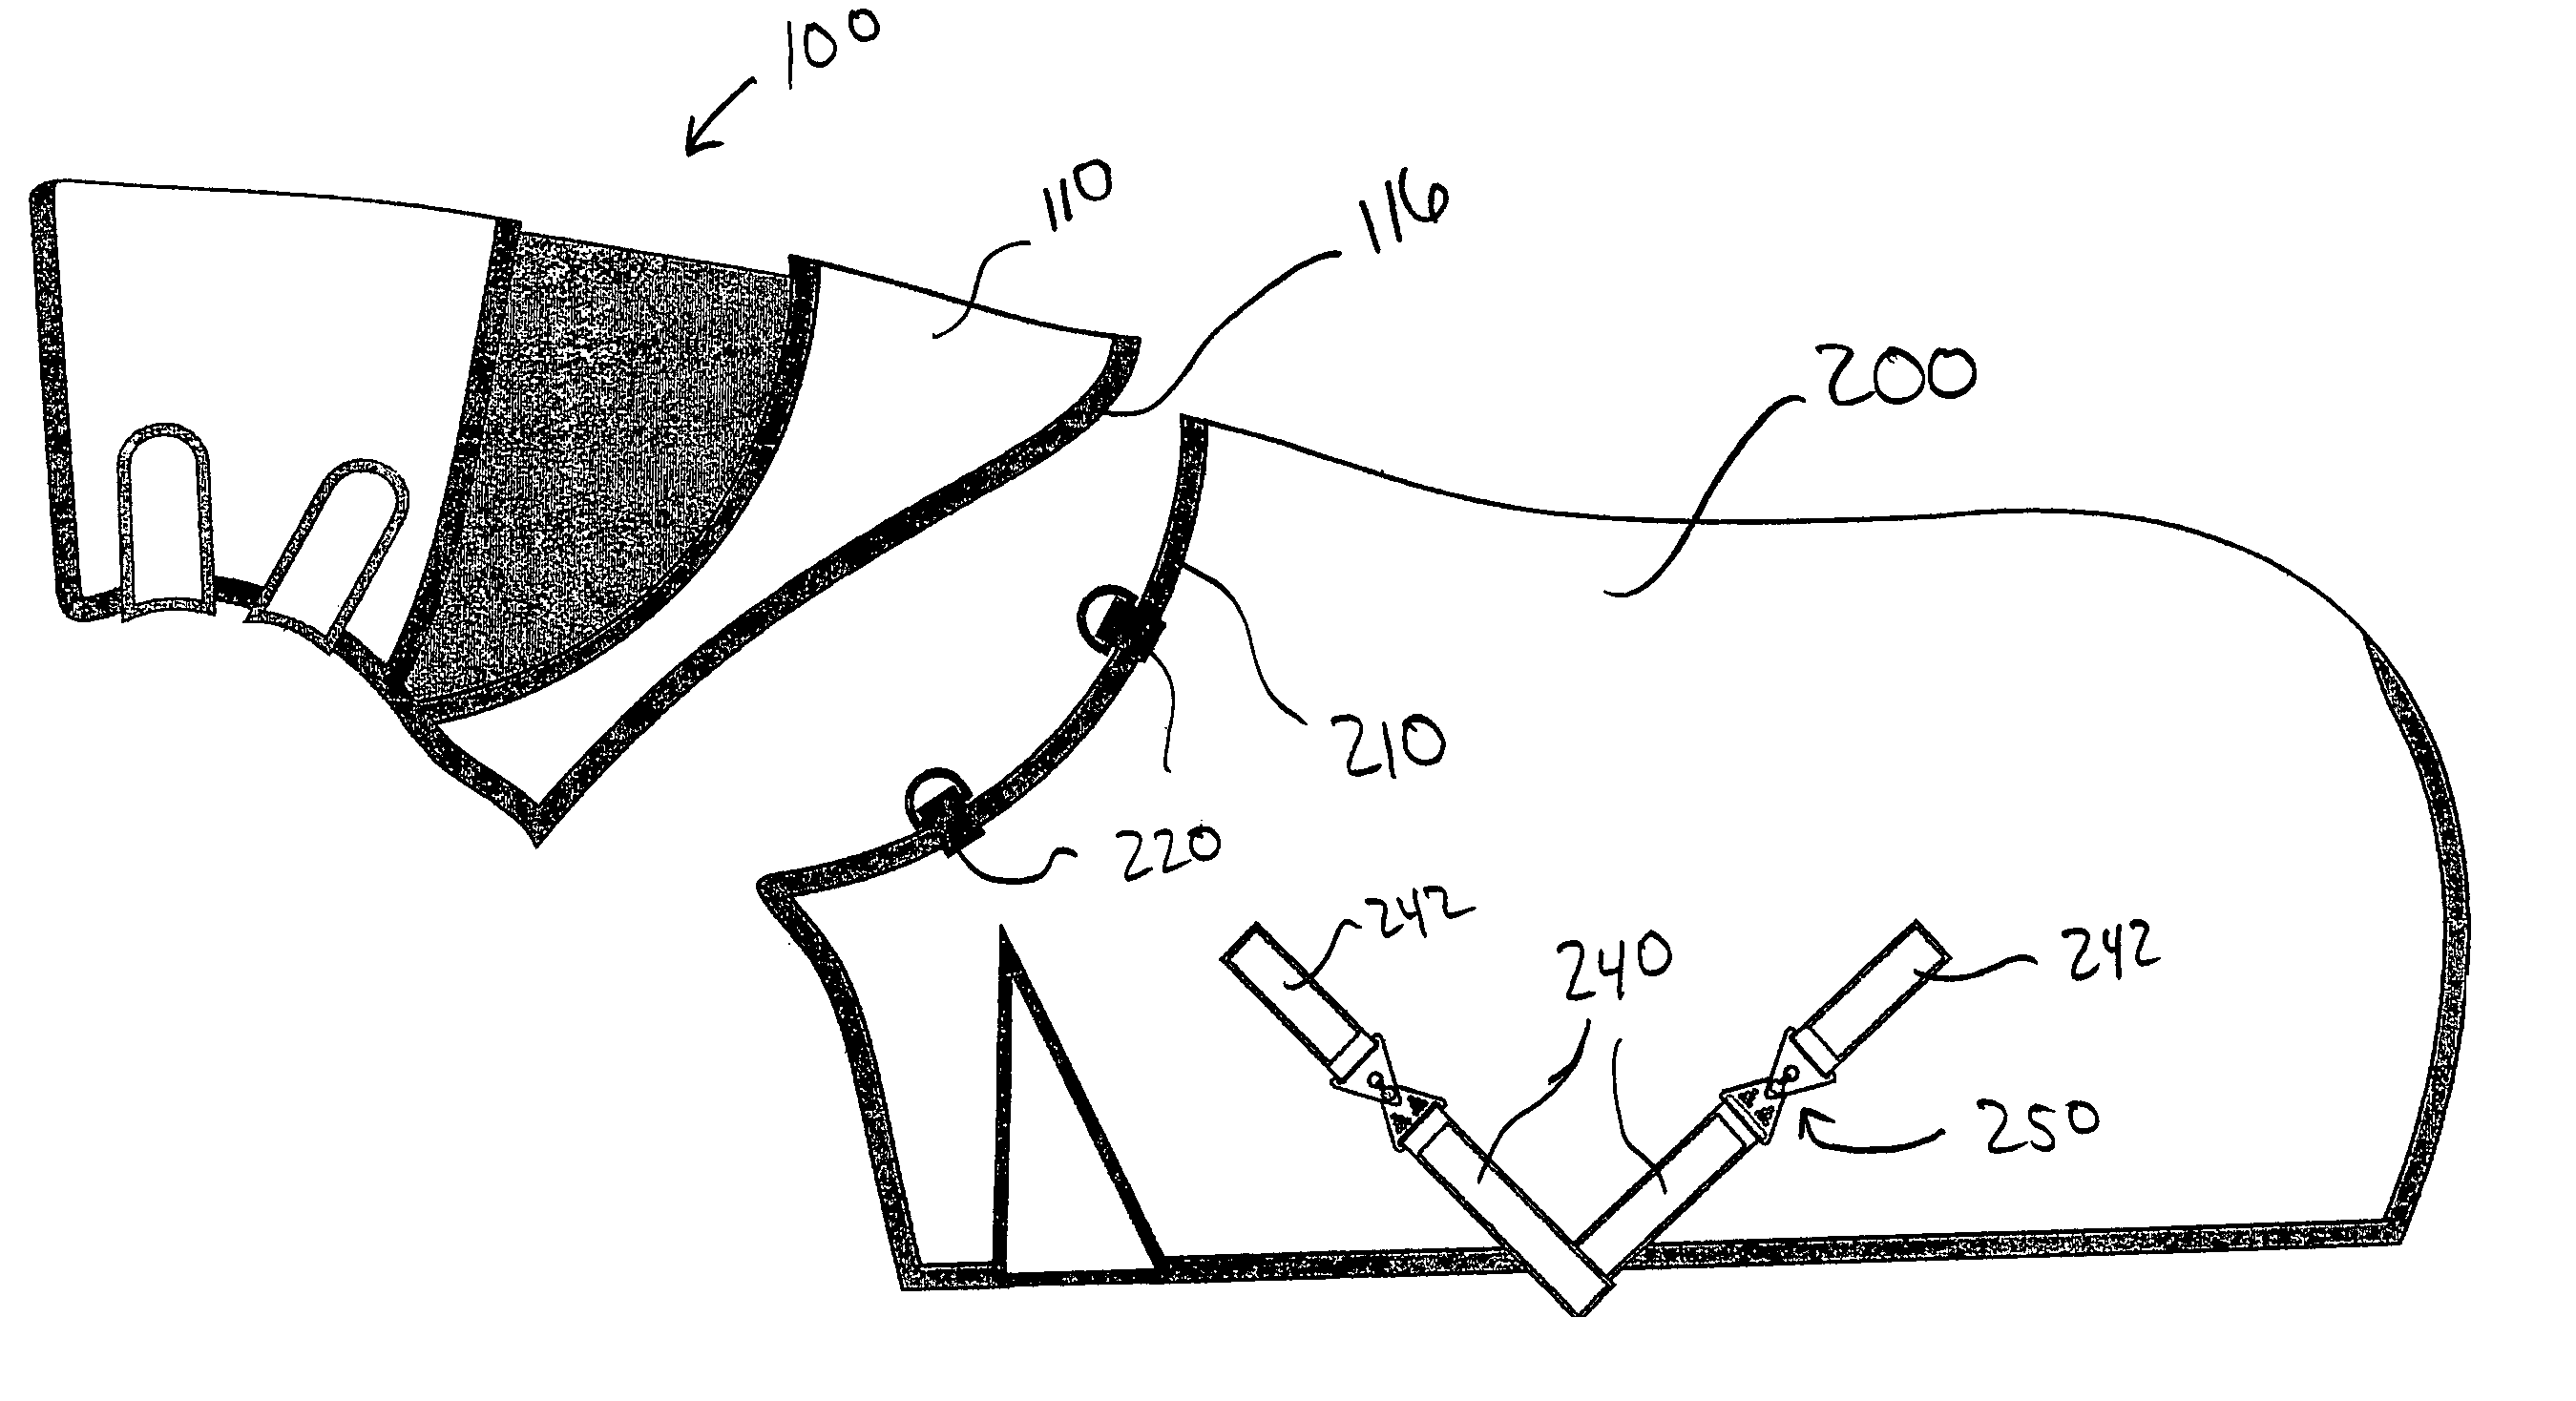 Horse hoods and methods of making